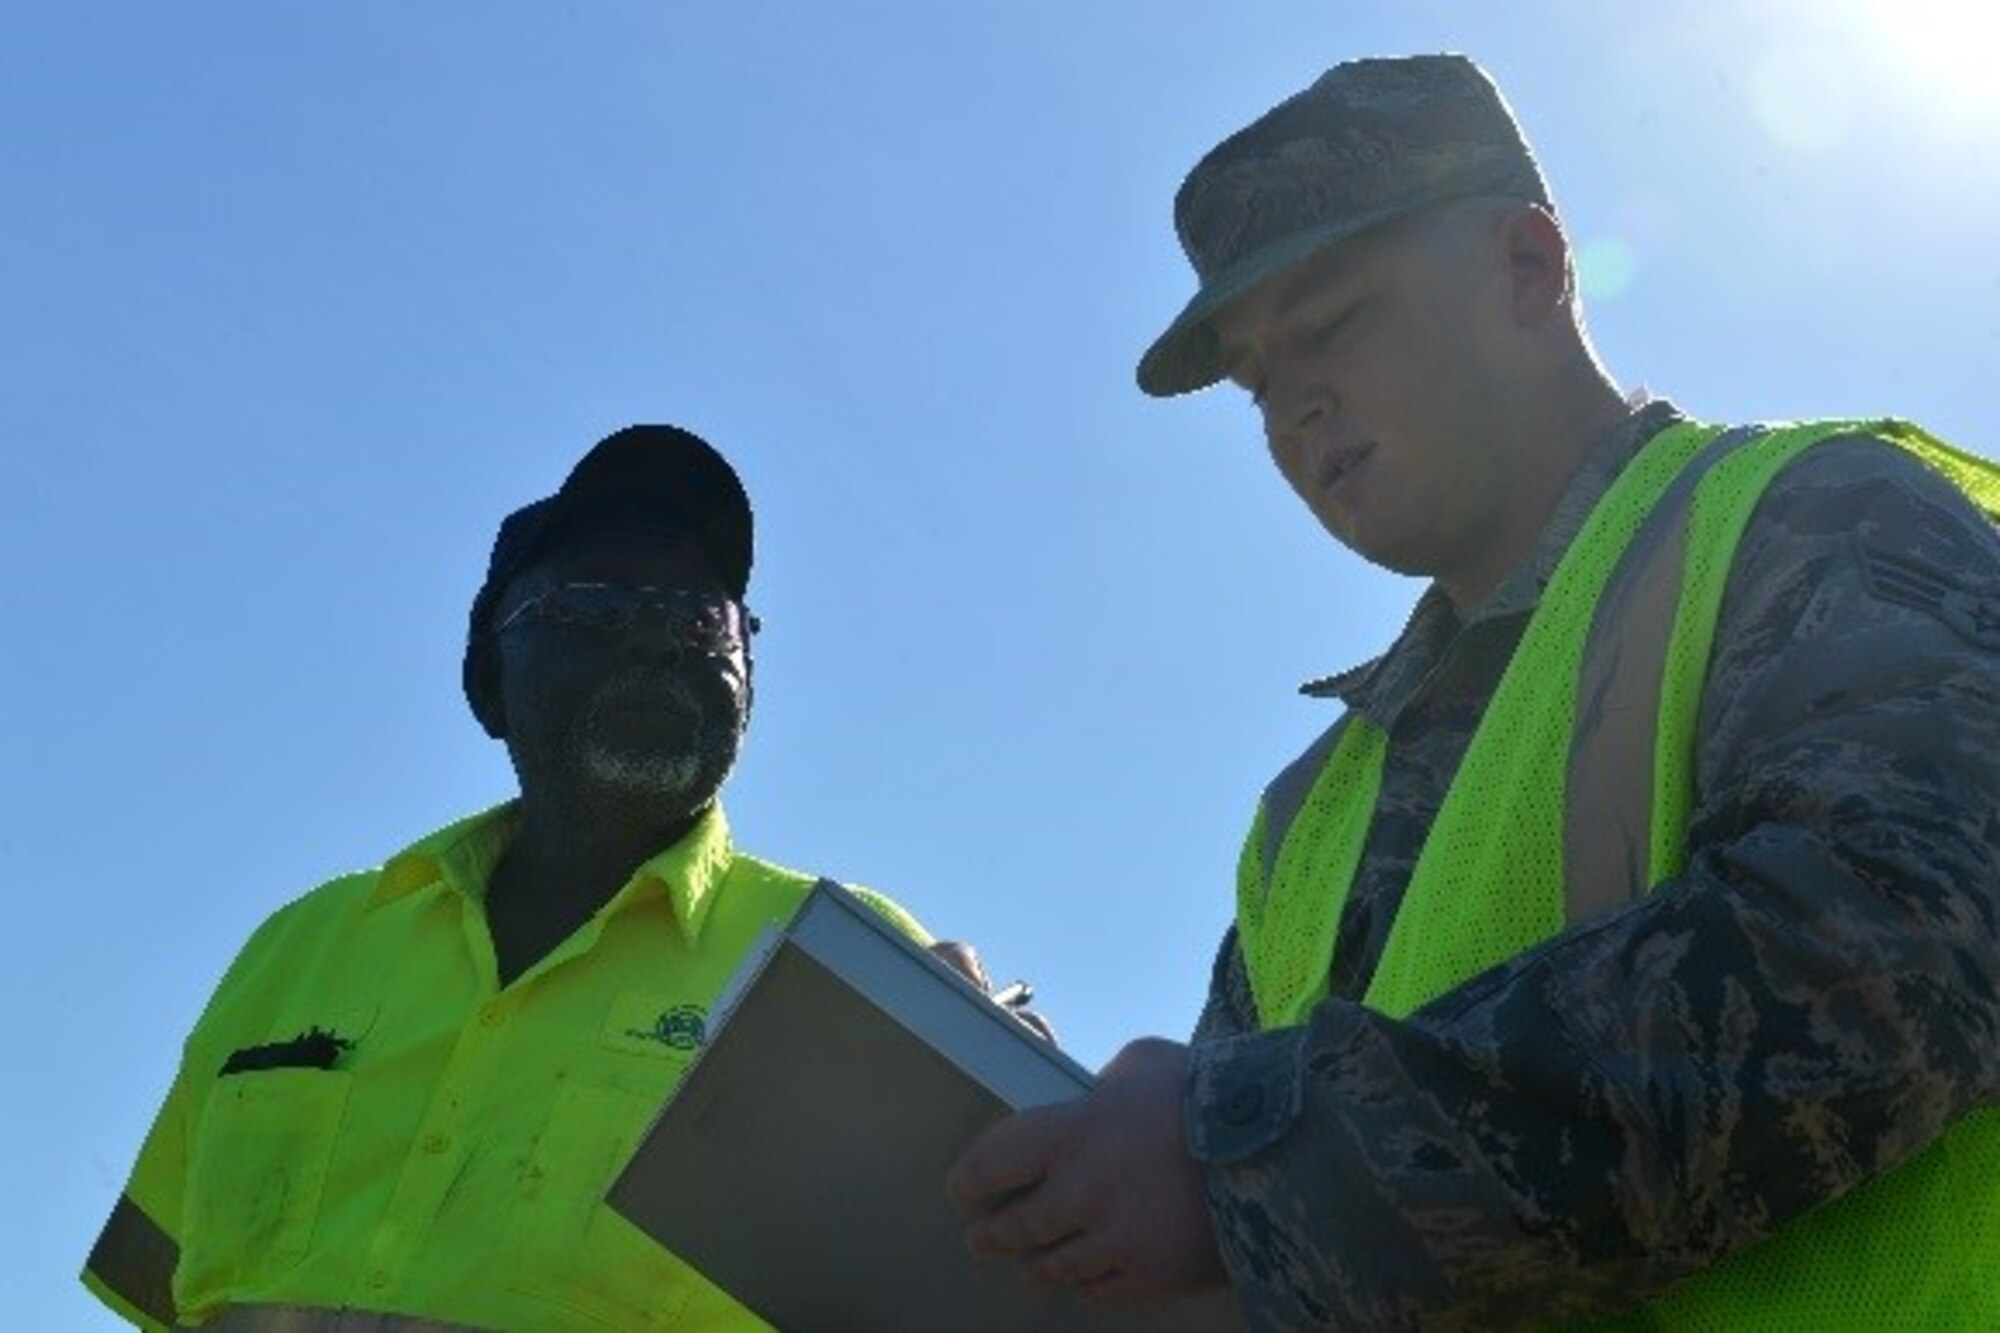 U.S. Air Force Senior Airman Aaron Kelly, 20th Contracting Squadron (CONS) infrastructure contracting officer, speaks with a contractor at Shaw Air Force Base, S.C., April 11, 2017. Airmen assigned to the 20th CONS infrastructure flight perform work condition checks on all contractors to check for hours worked, current pay conditions and quality of work. (U.S. Air Force photo by Airman 1st Class Christopher Maldonado)